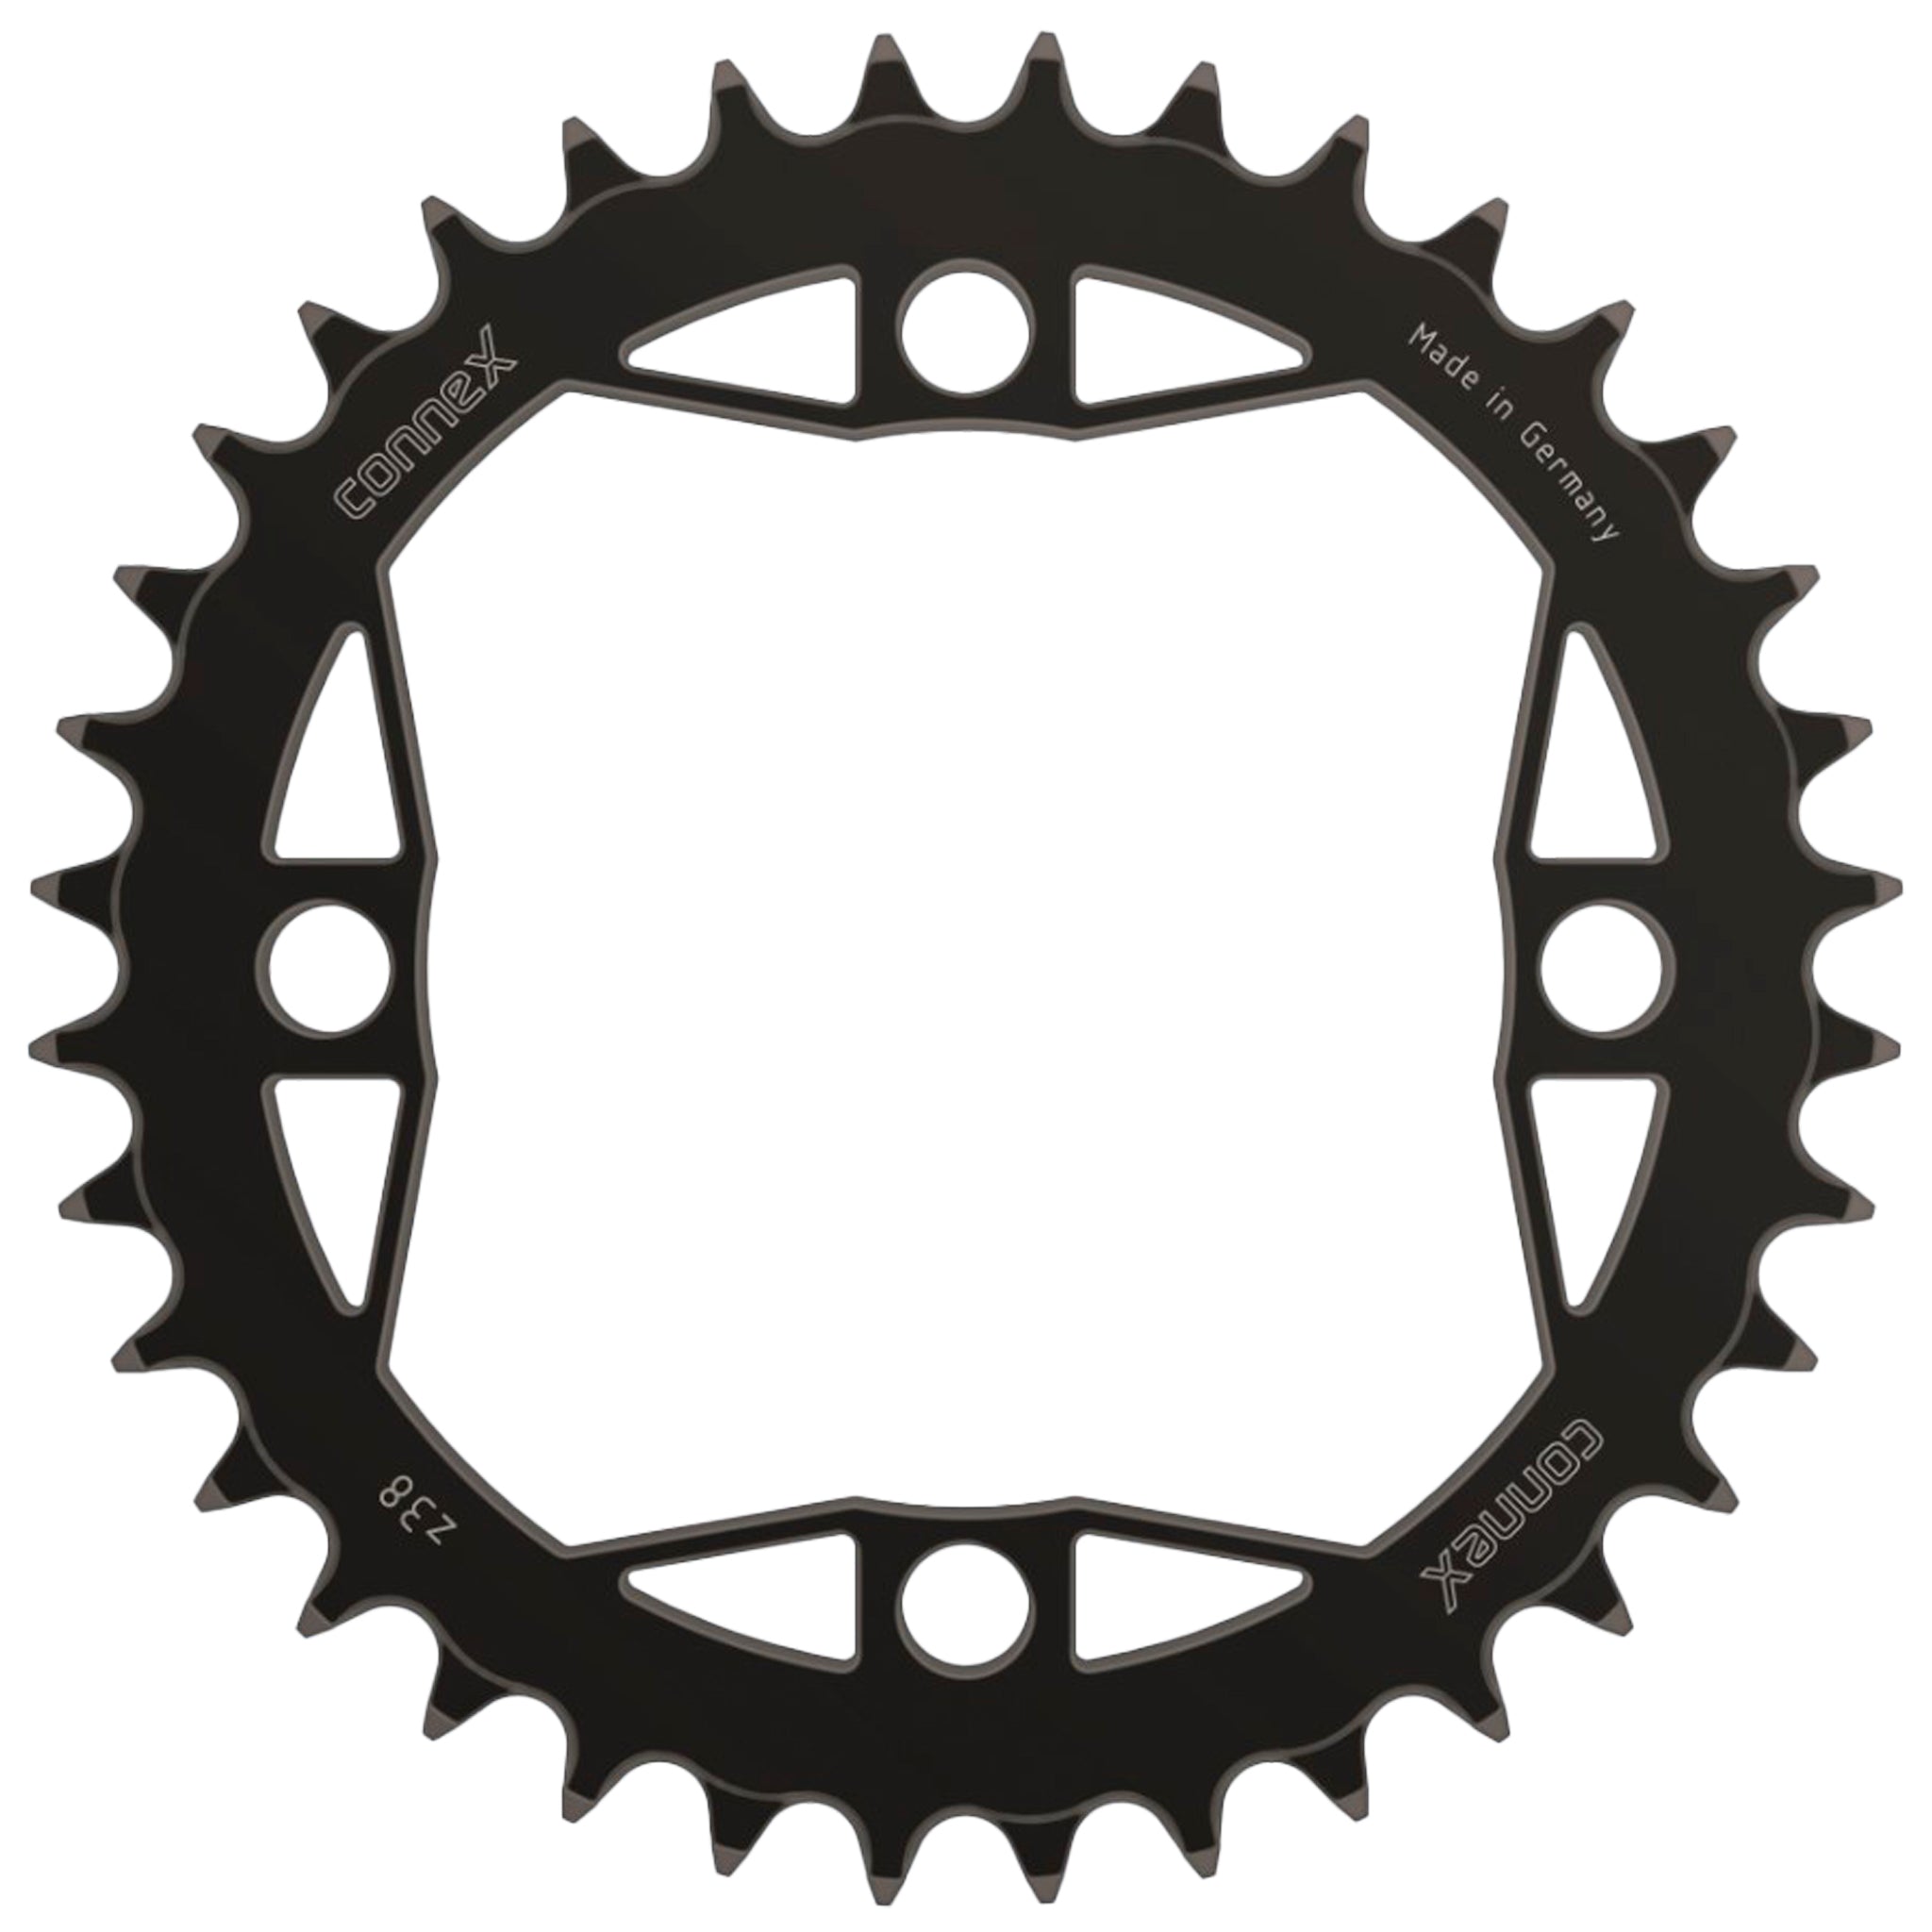 Connex Steel 1x Narrow Wide Chainring 36T 104 BCD